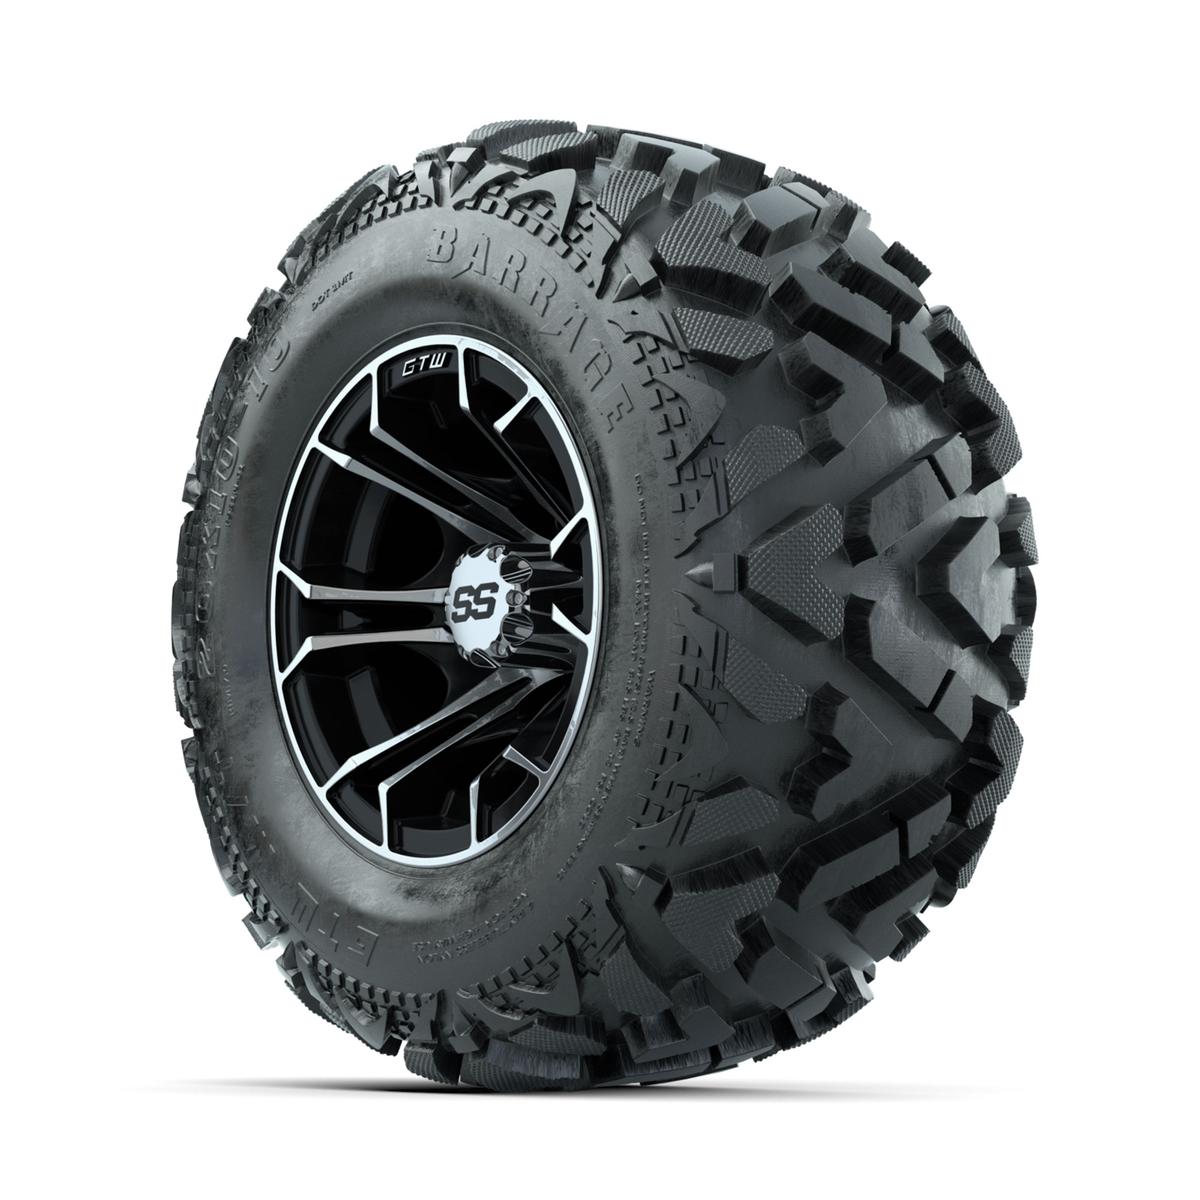 GTW Spyder Machined/Black 10 in Wheels with 20x10-10 Barrage Mud Tires – Full Set